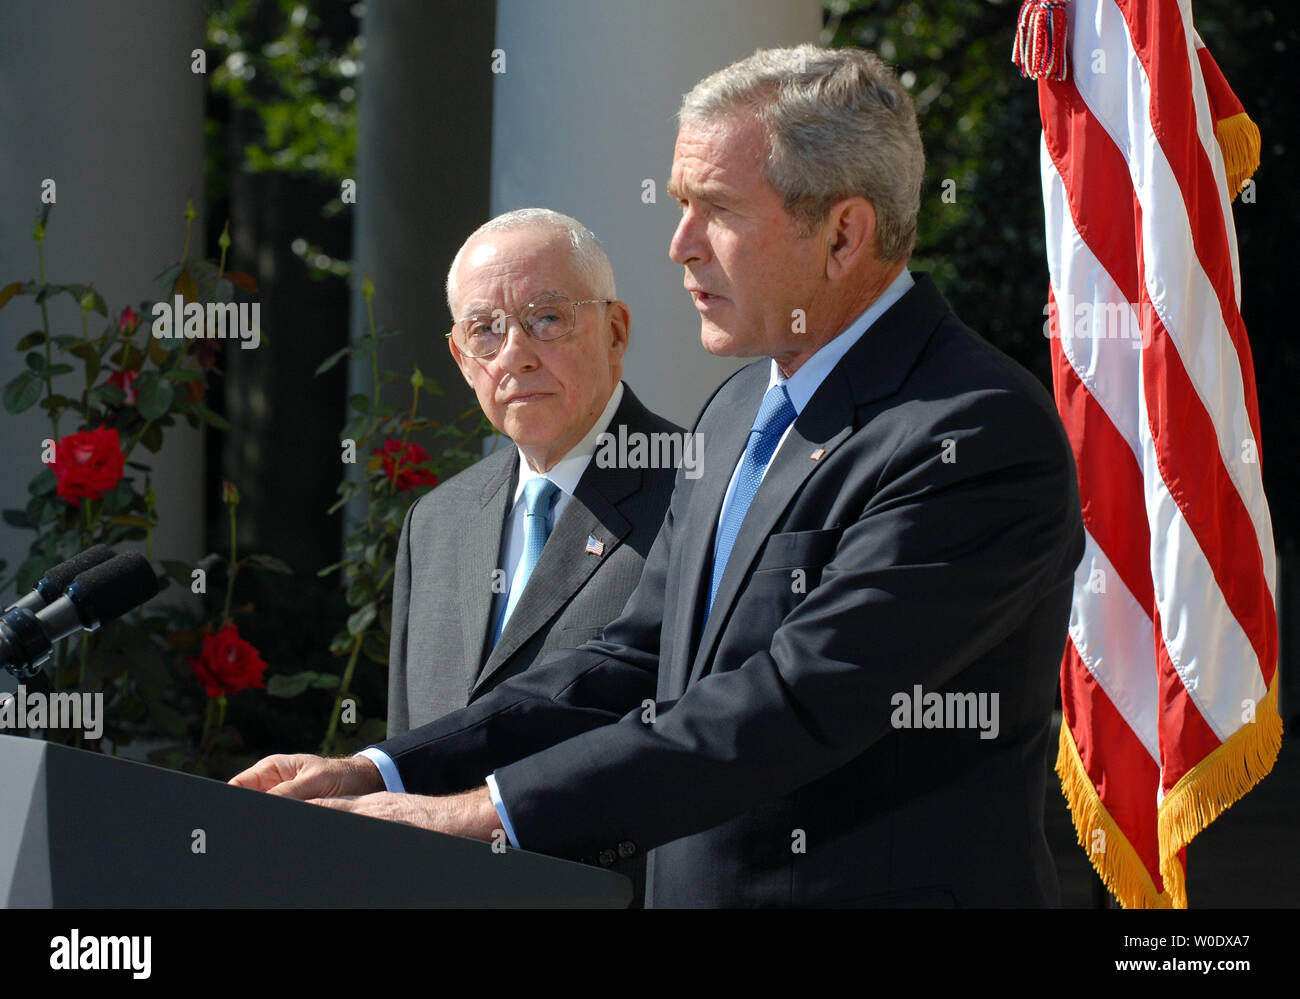 U.S. President George W. Bush (R) announces Michael B. Mukasey, a retired federal judge from New York, to replace Alberto Gonzales as attorney general in the Rose Garden of the White House on September 17, 2007.   (UPI Photo/Roger L. Wollenberg) Stock Photo